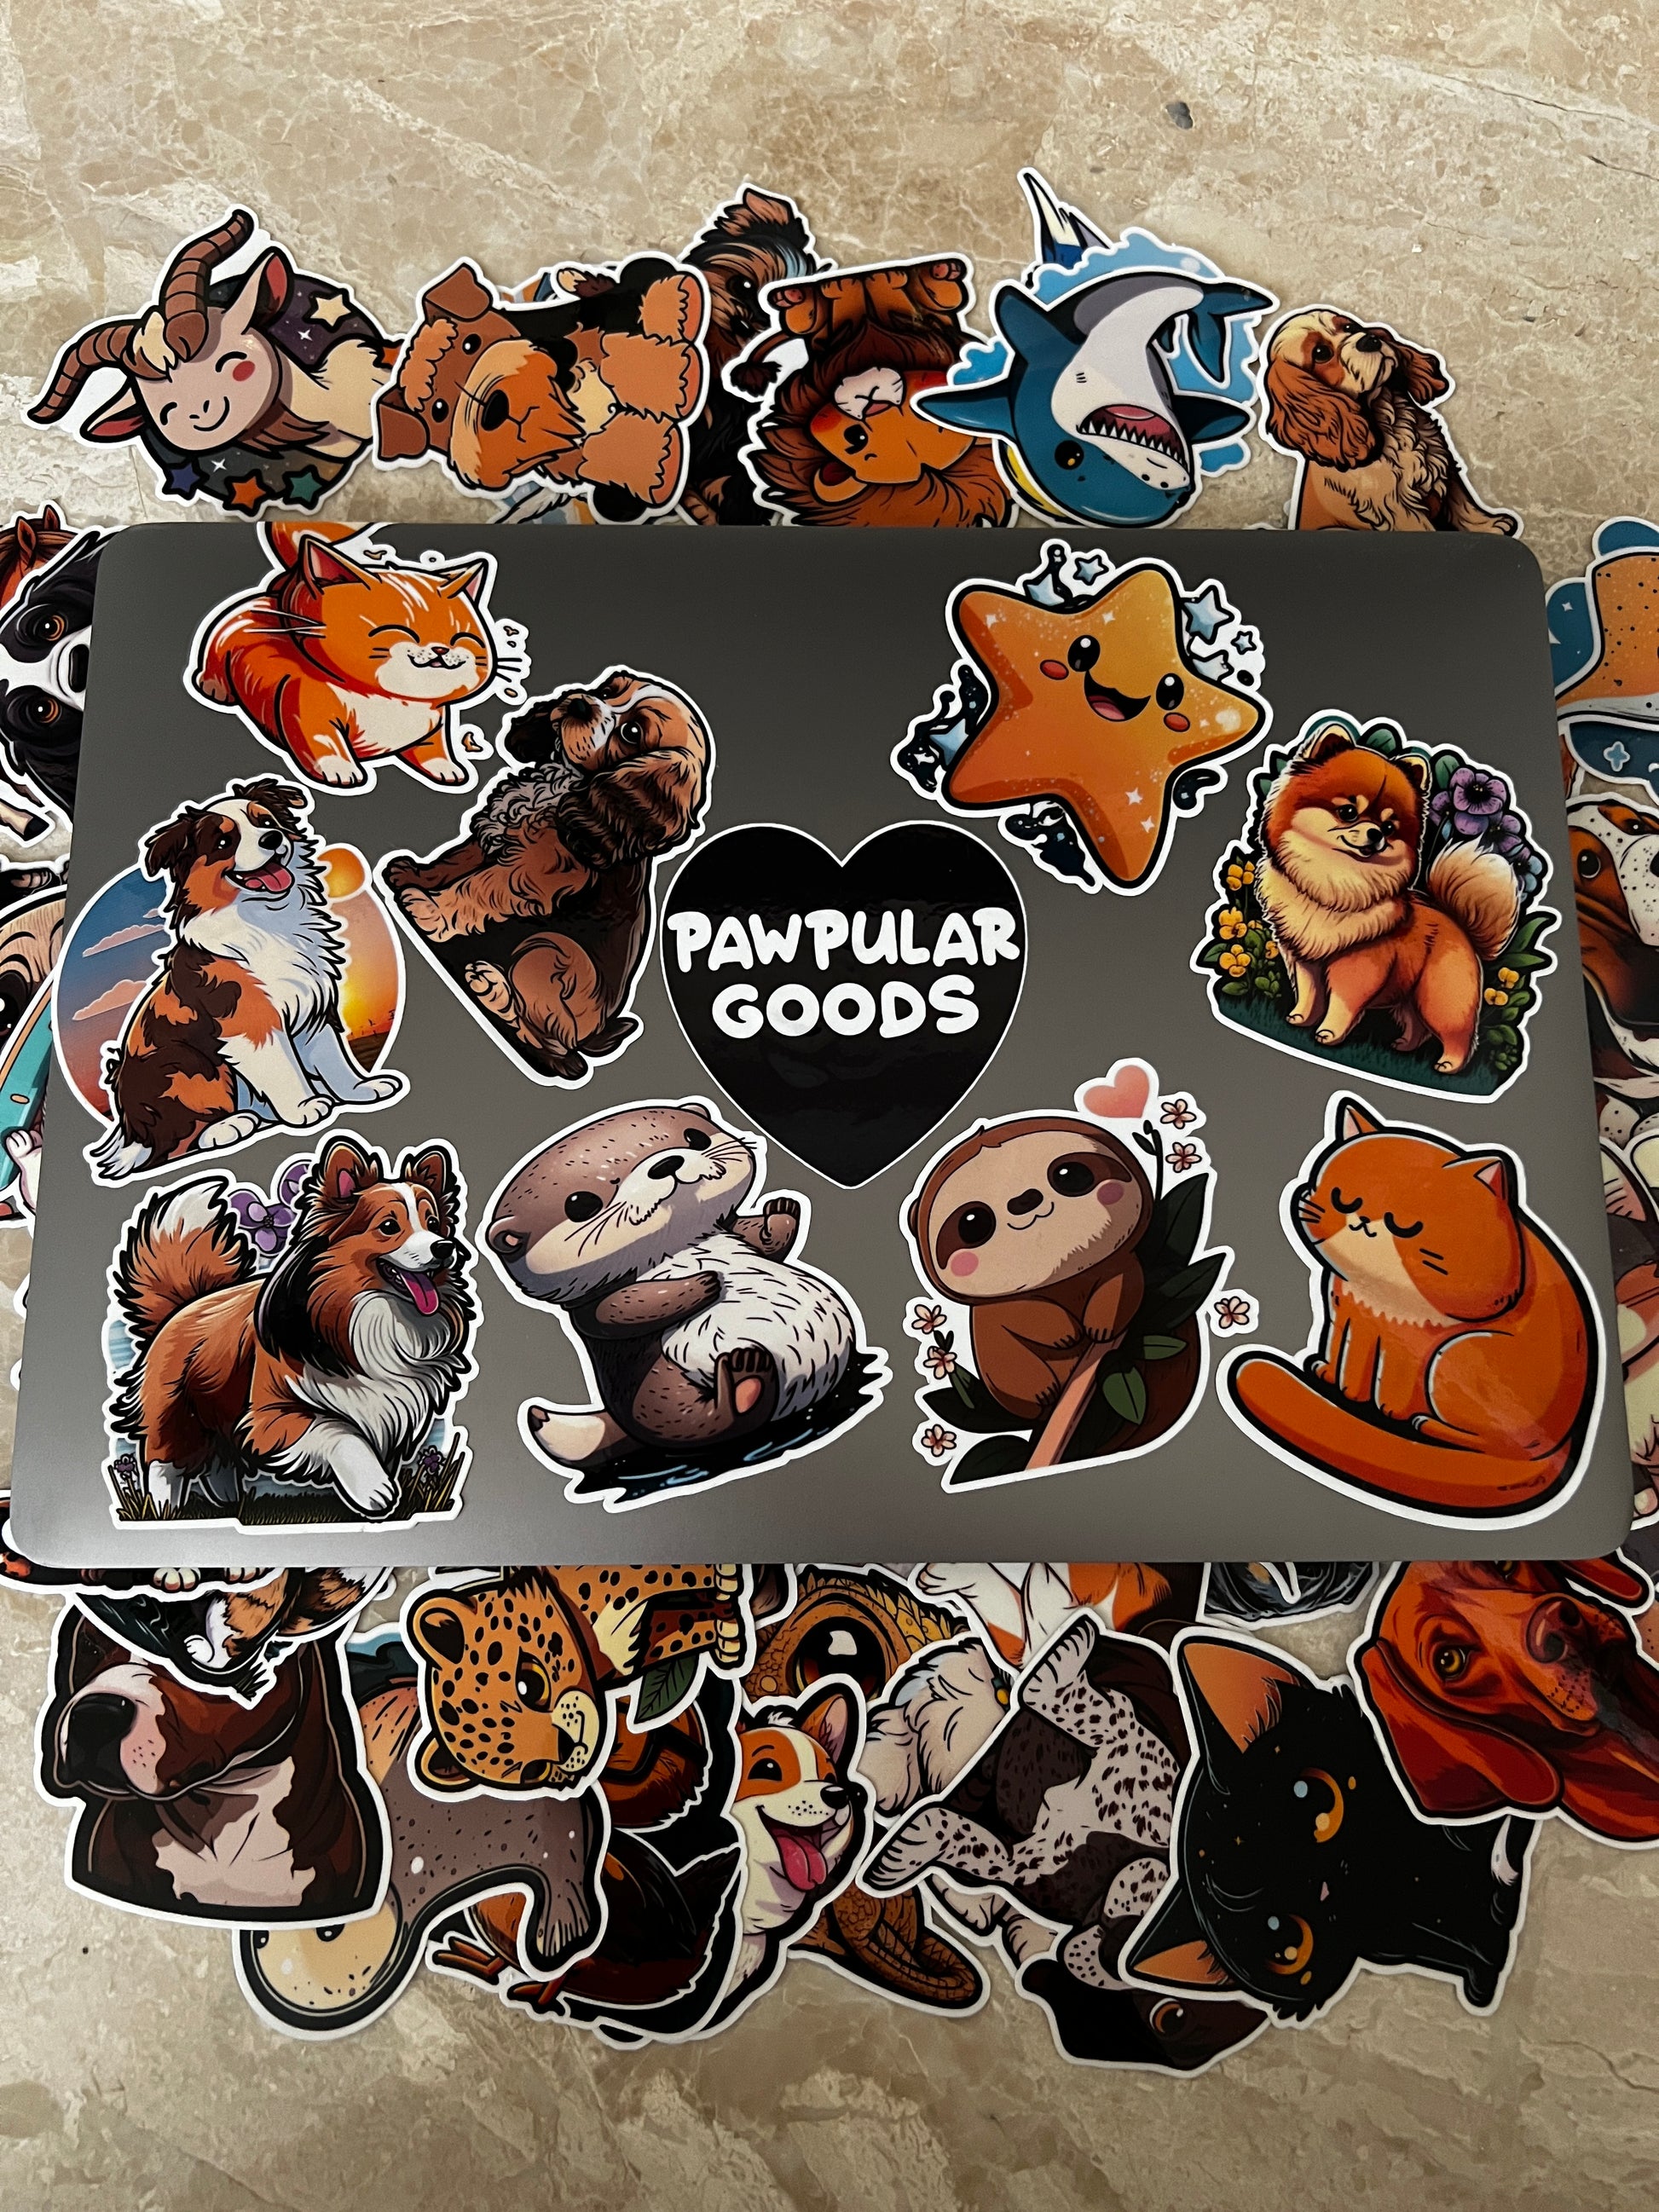 American Staffordshire Terrier Stickers Pack of 5